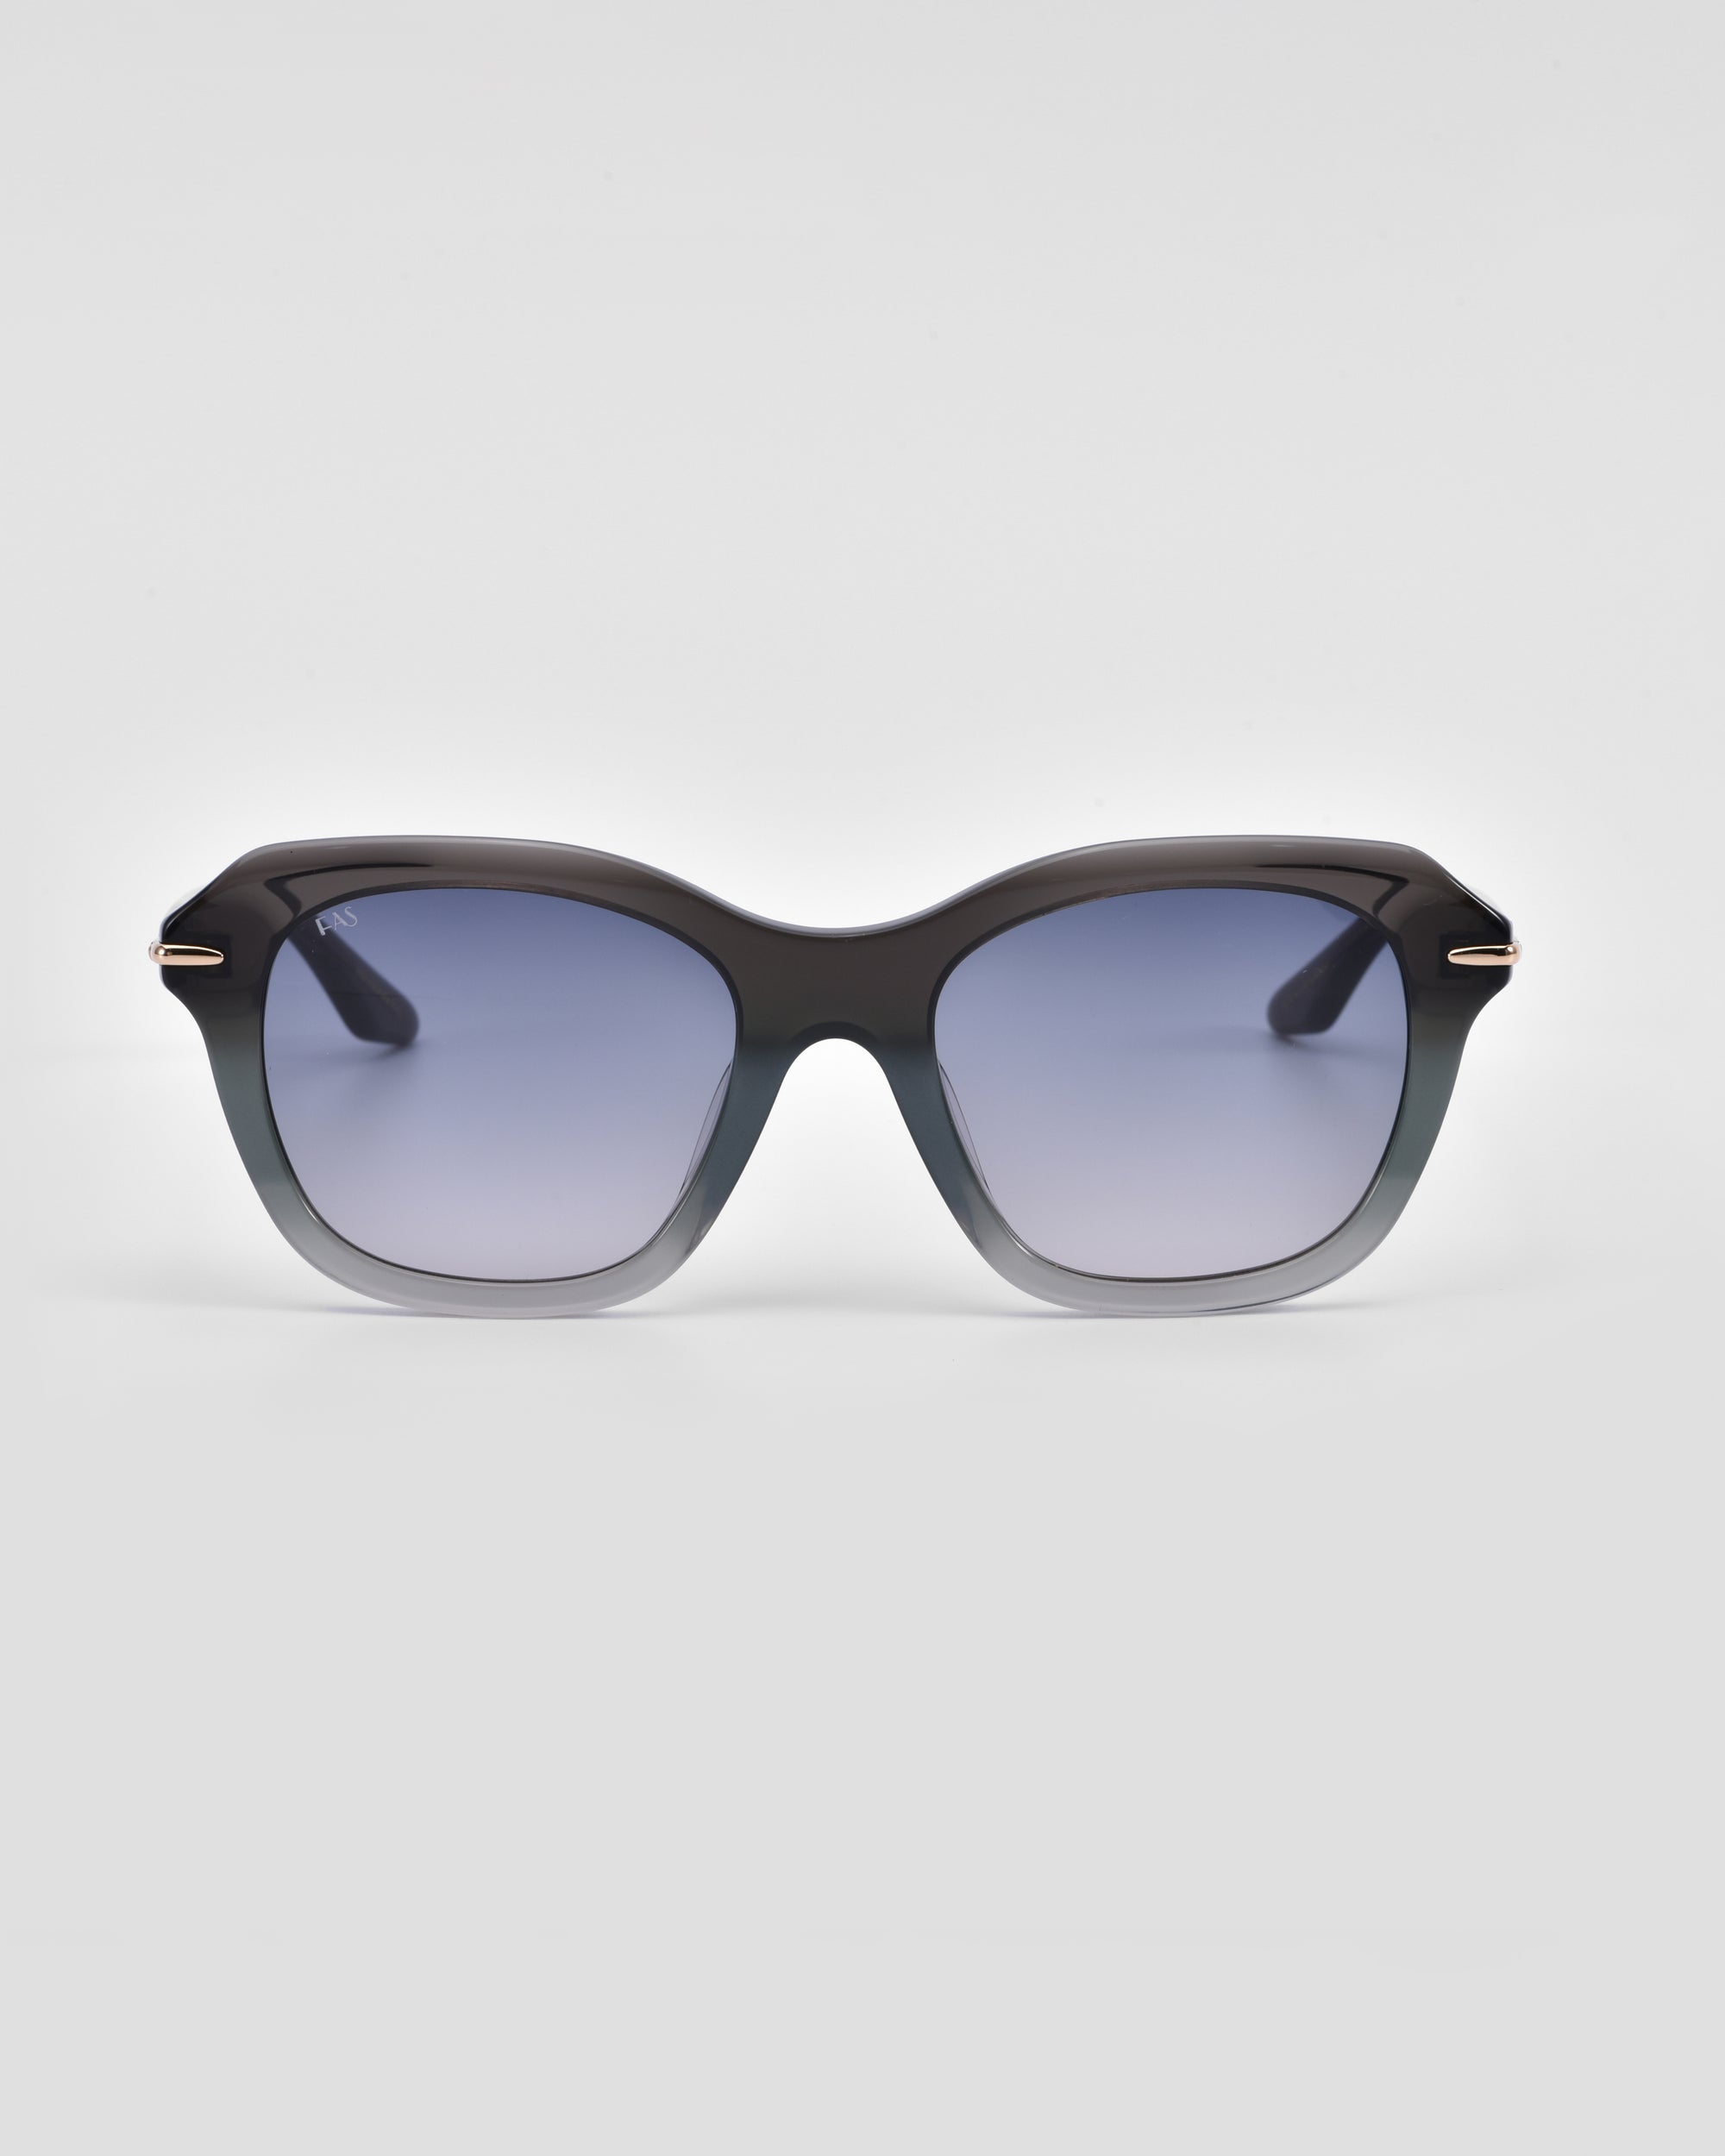 A pair of stylish, oversized For Art's Sake® Helene cat-eye sunglasses with black frames that gradually transition to a lighter shade at the bottom. The lenses are tinted dark, providing a cool and fashionable look. The background is plain and light gray.